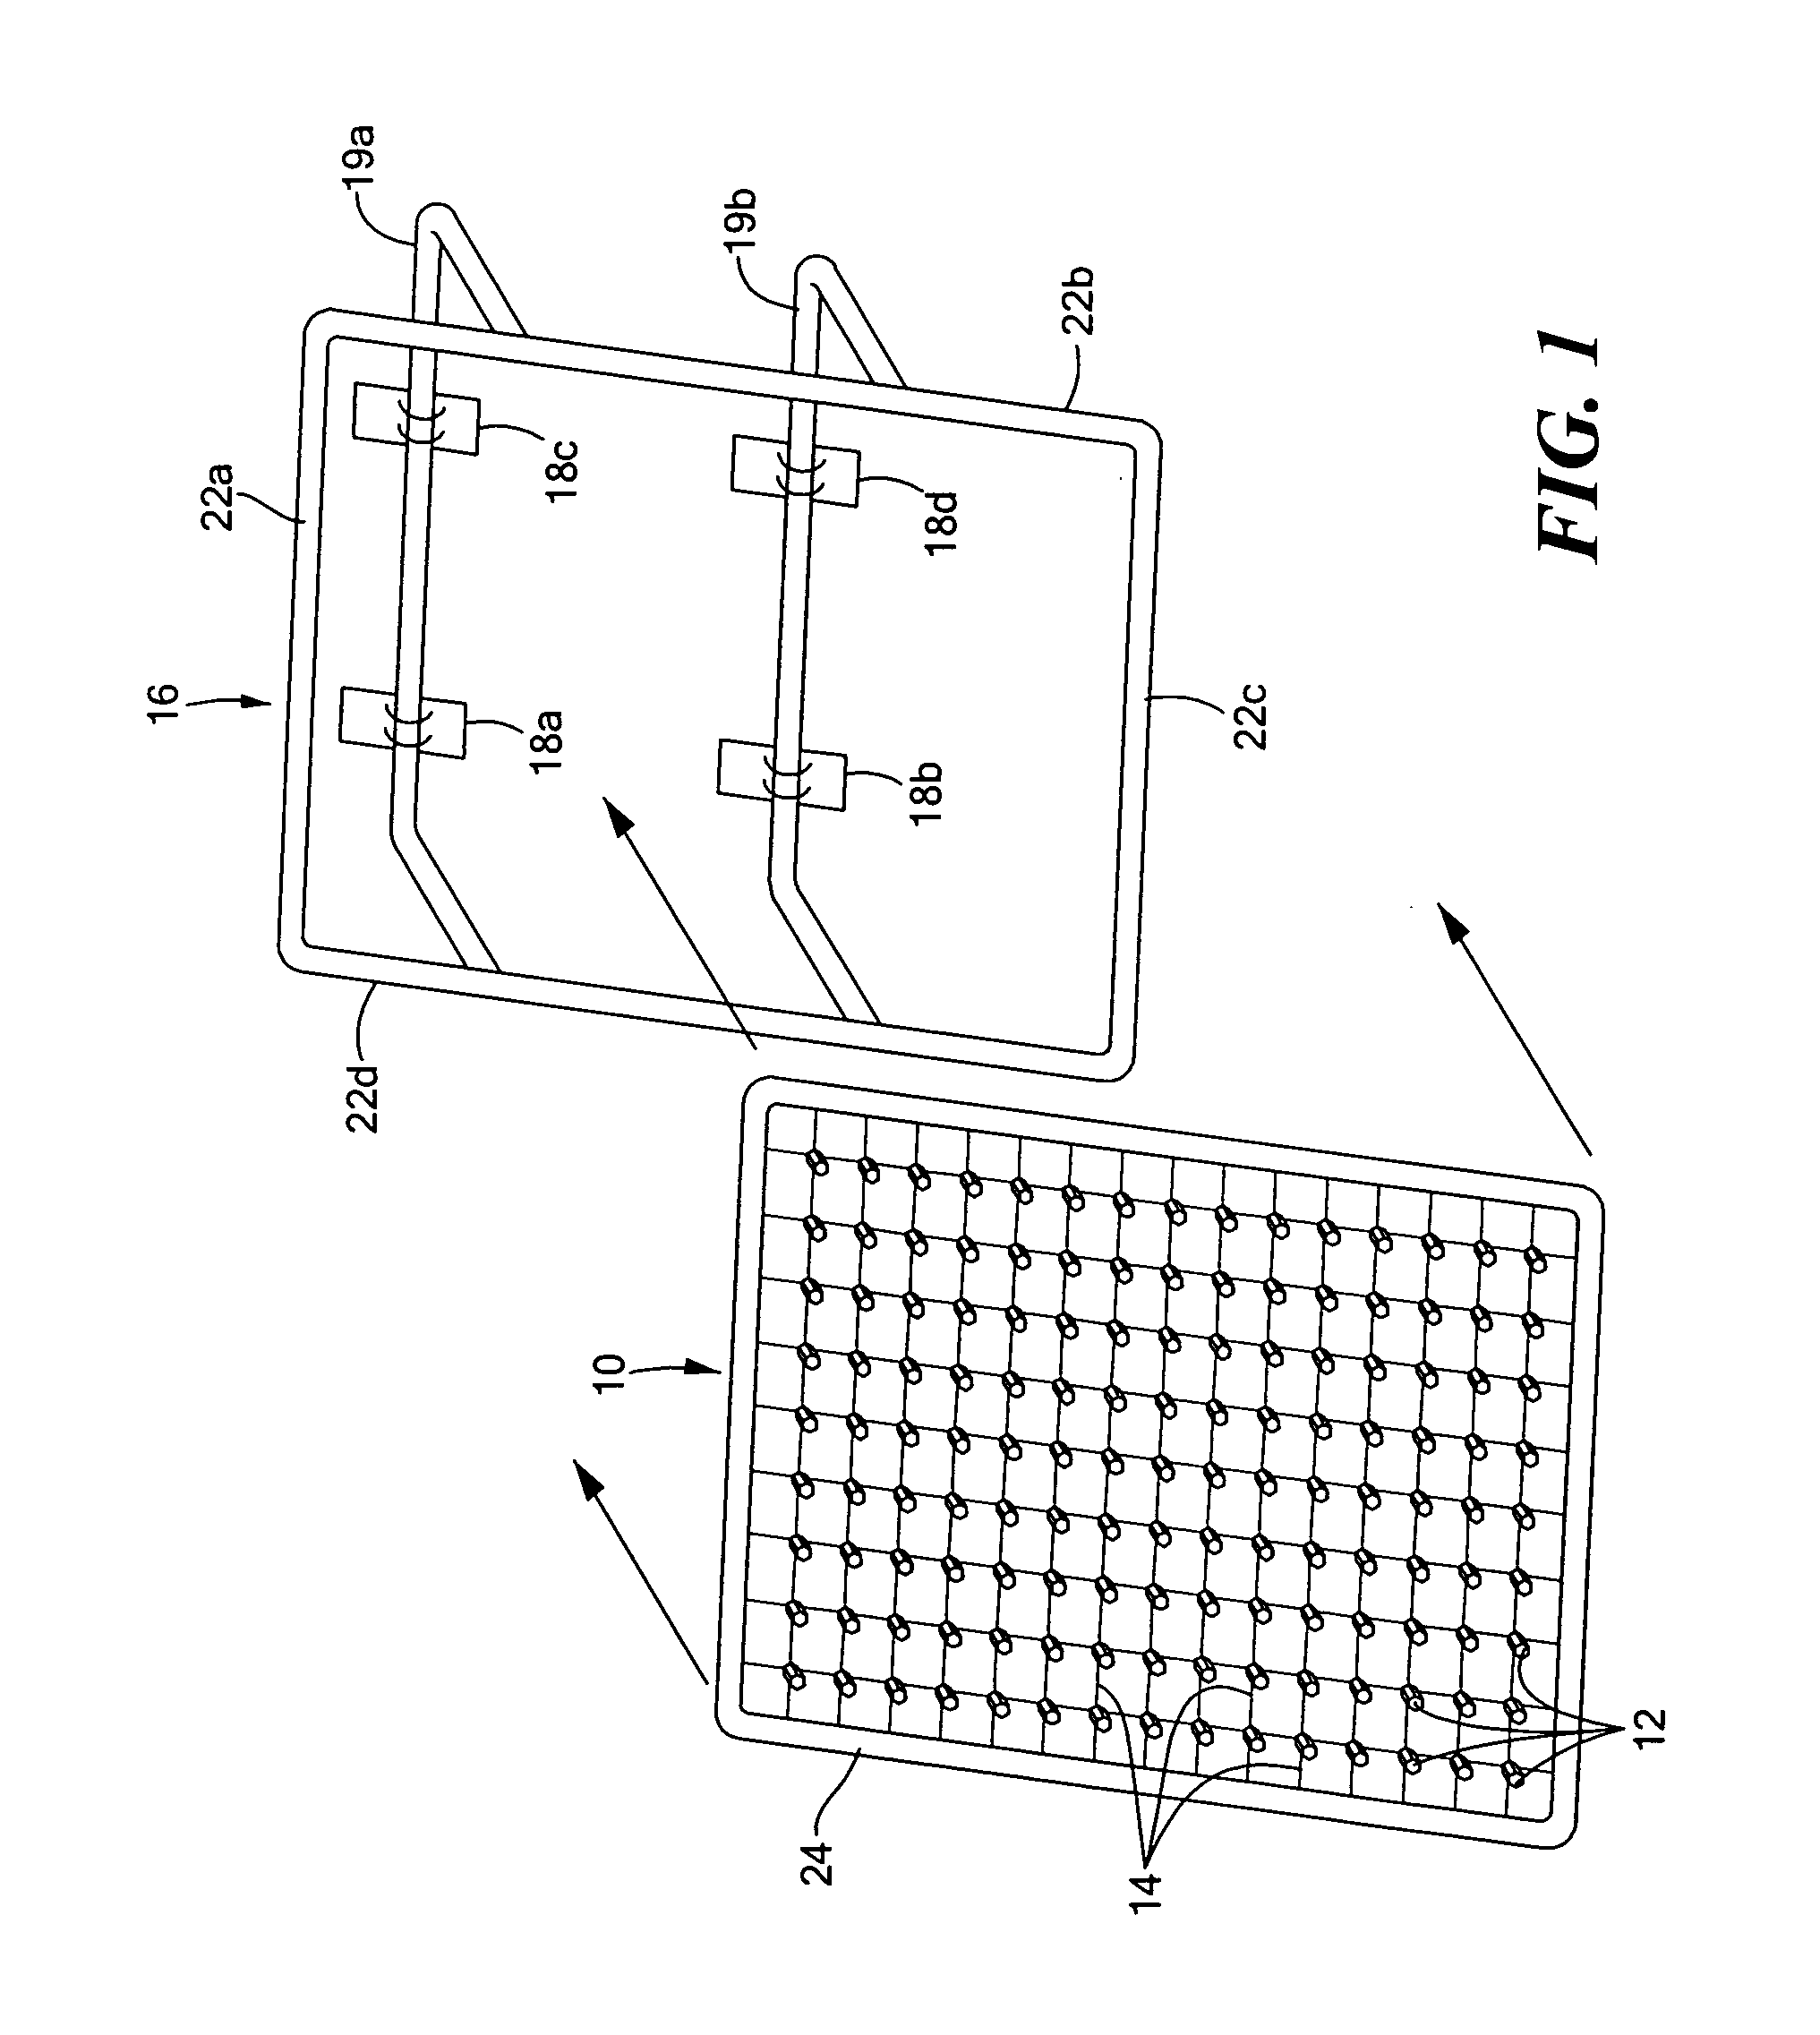 Vehicle and structure shield with a cable frame